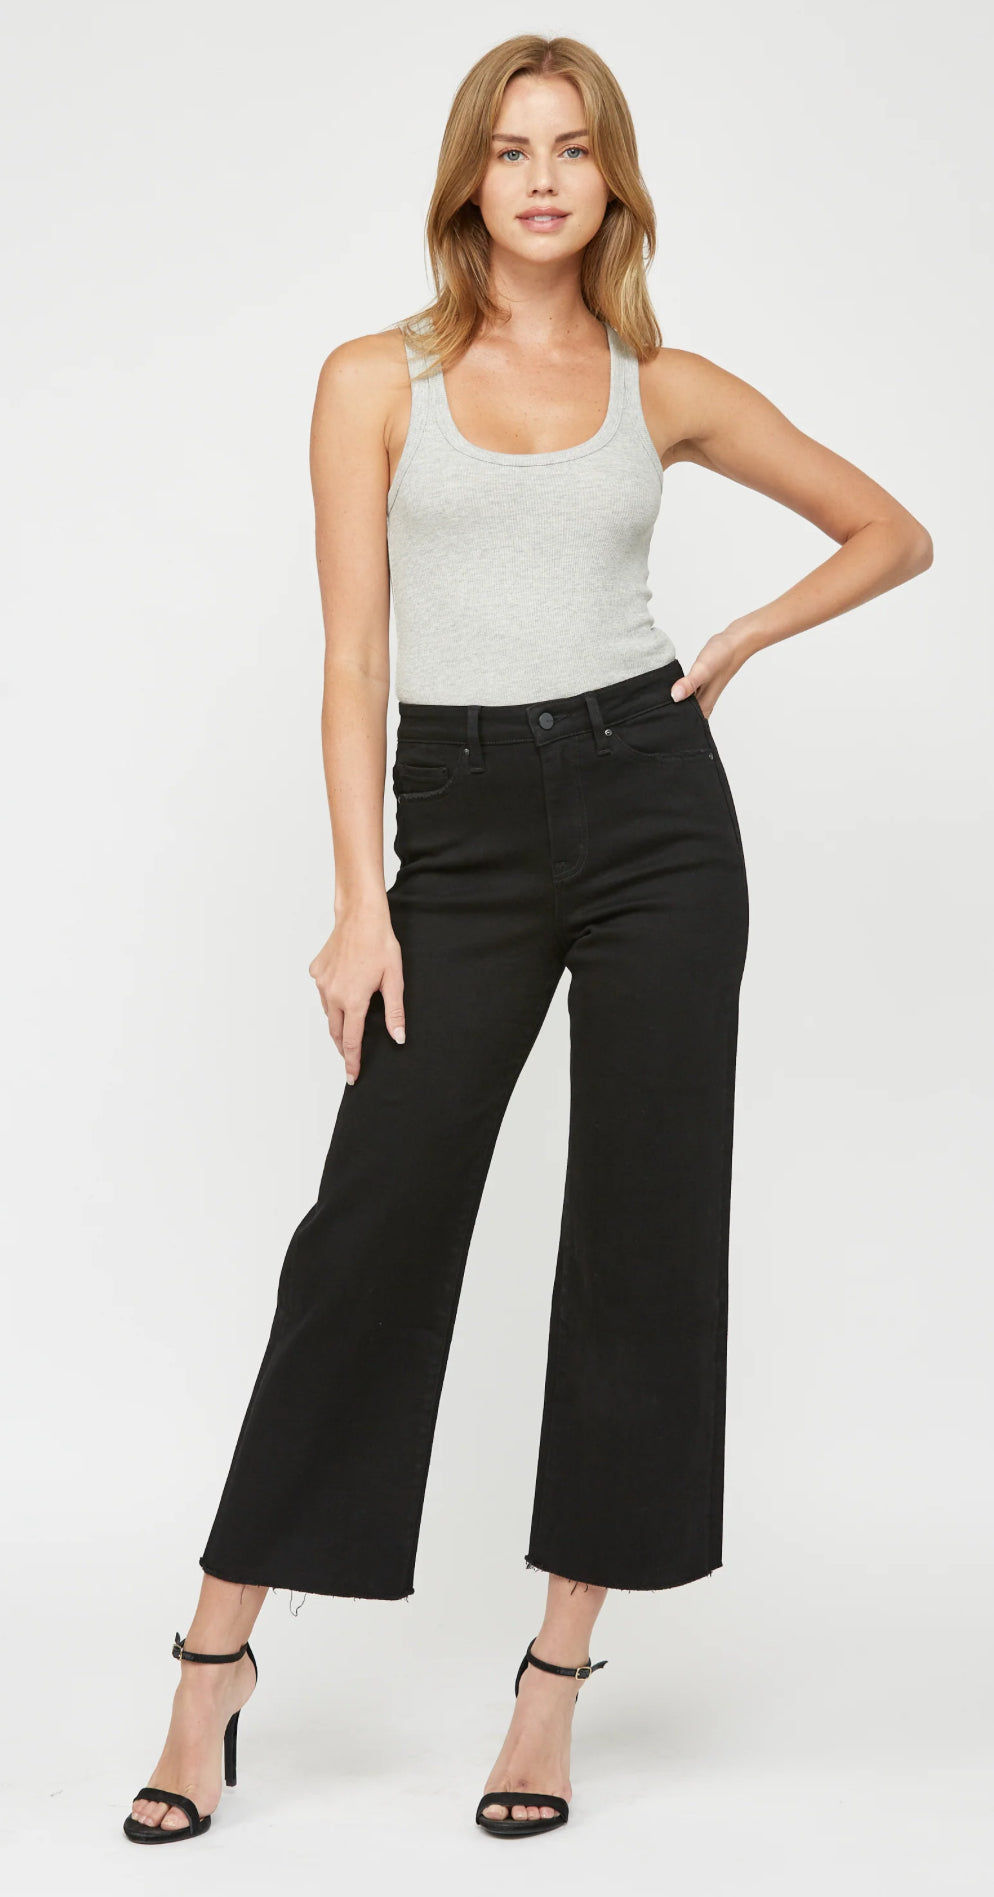 This Is The Way Black Wide Leg Jeans